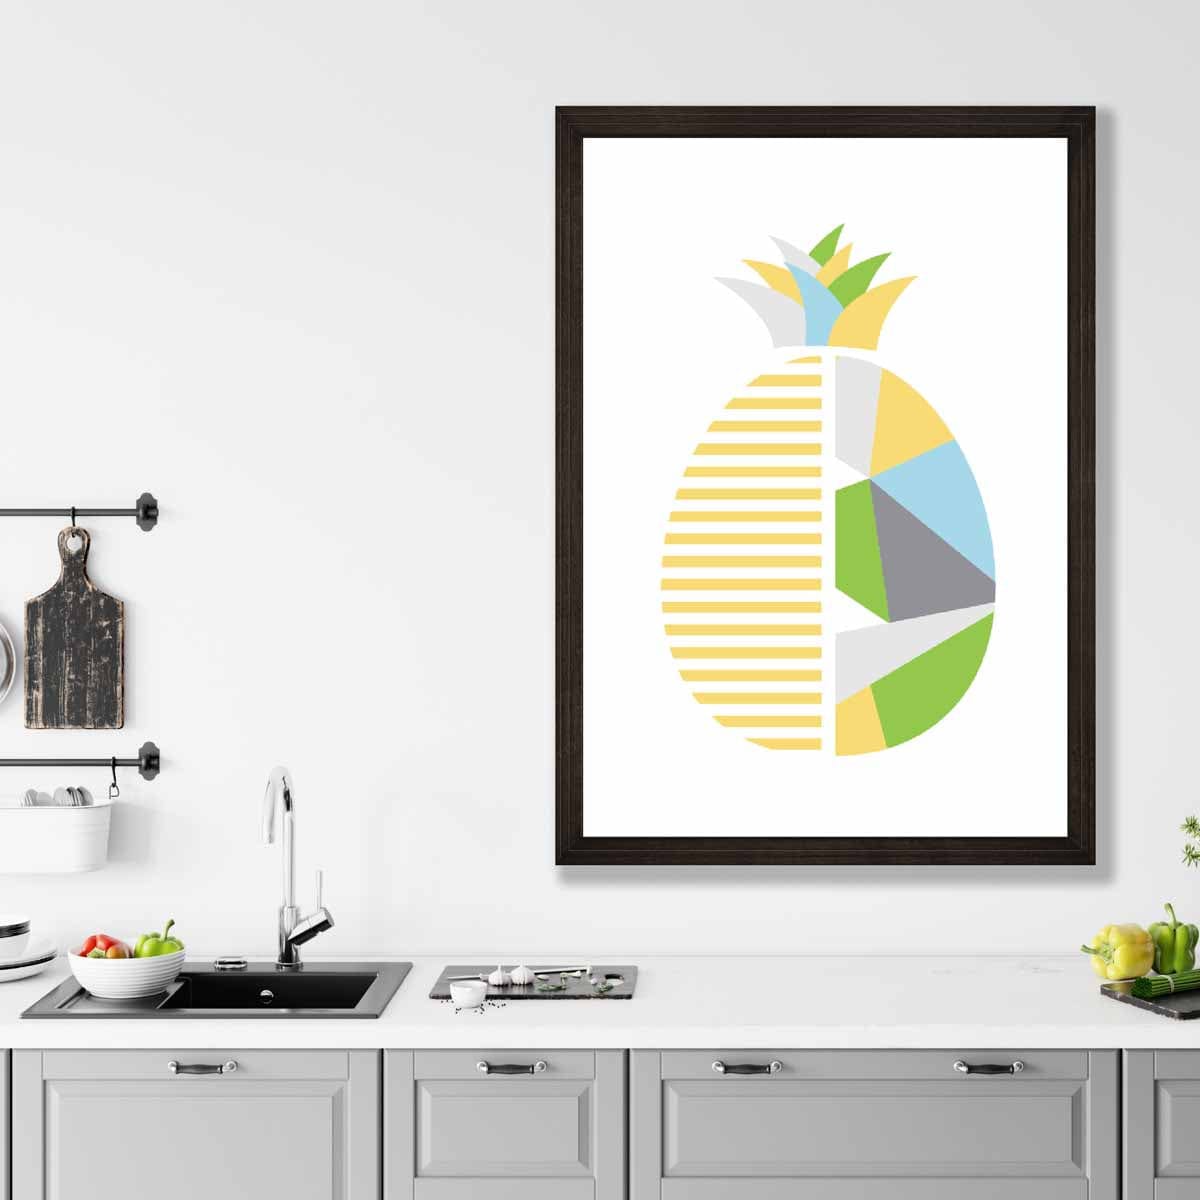 Geometric Fruit Poster of Pineapple in Yellow Blue Green